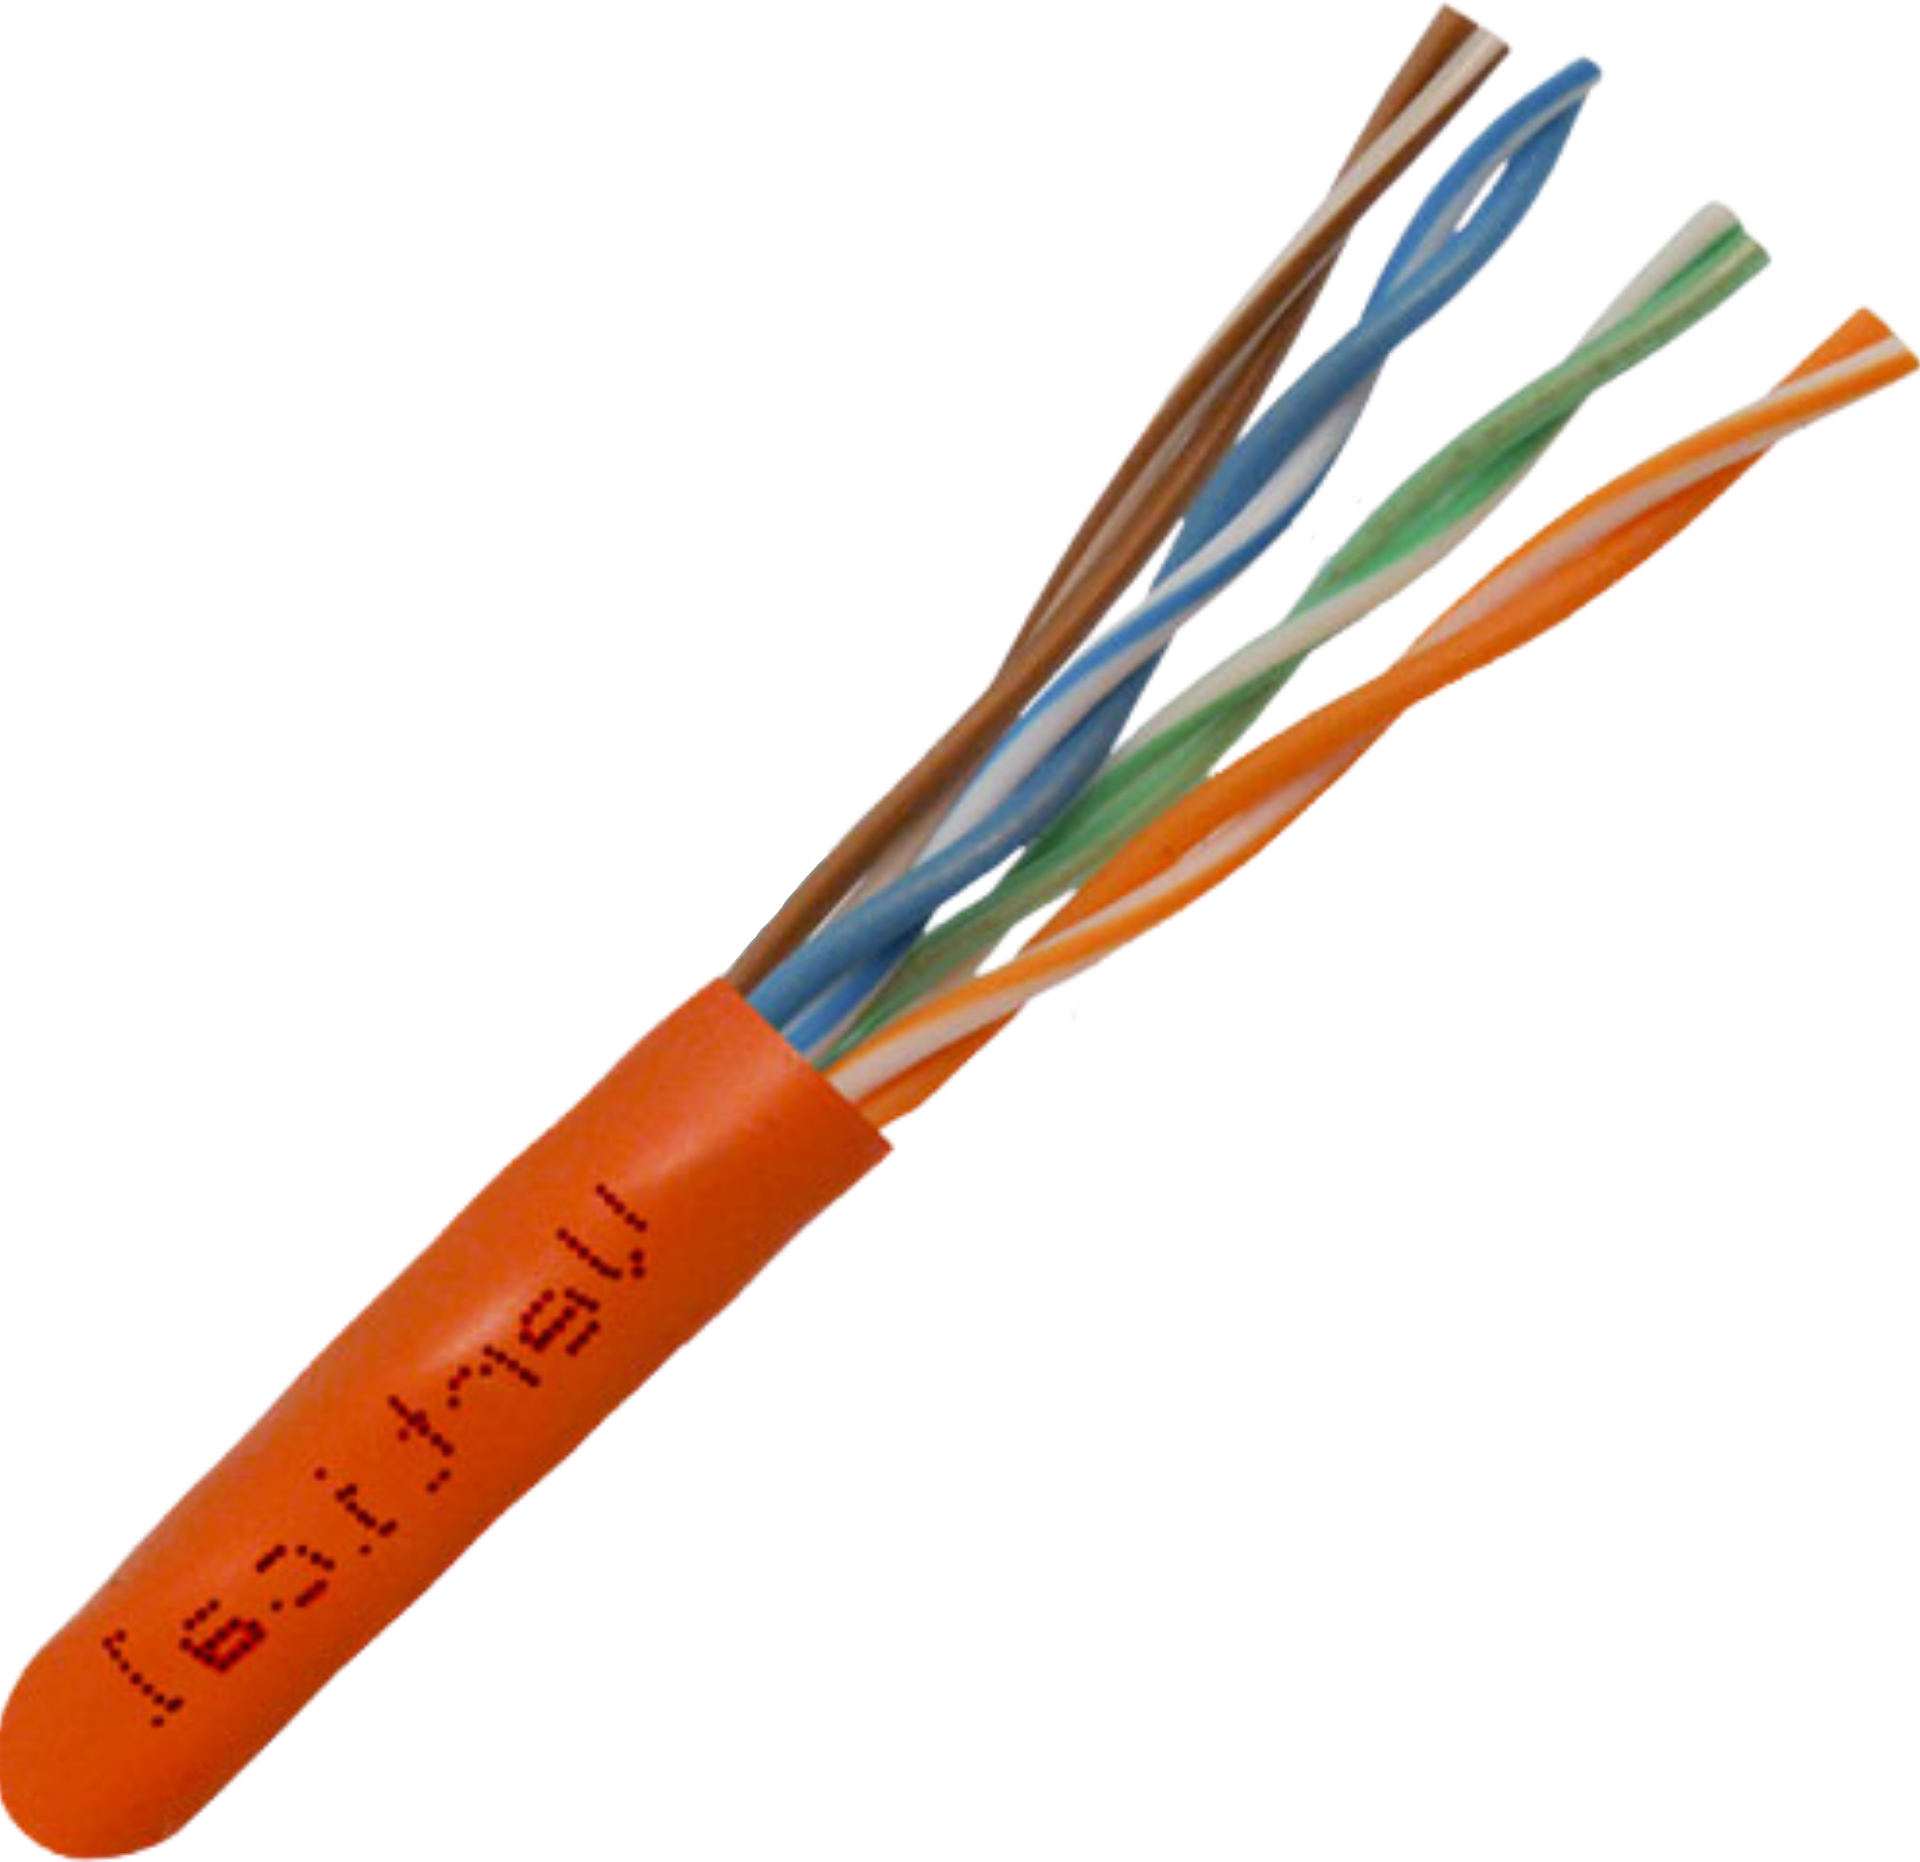 Vertical Cable Cat6, 550 MHz, UTP, 23AWG, 8C Solid Bare Copper, Plenum, 1000ft, Bulk Ethernet Cable - Made in USA, Orange